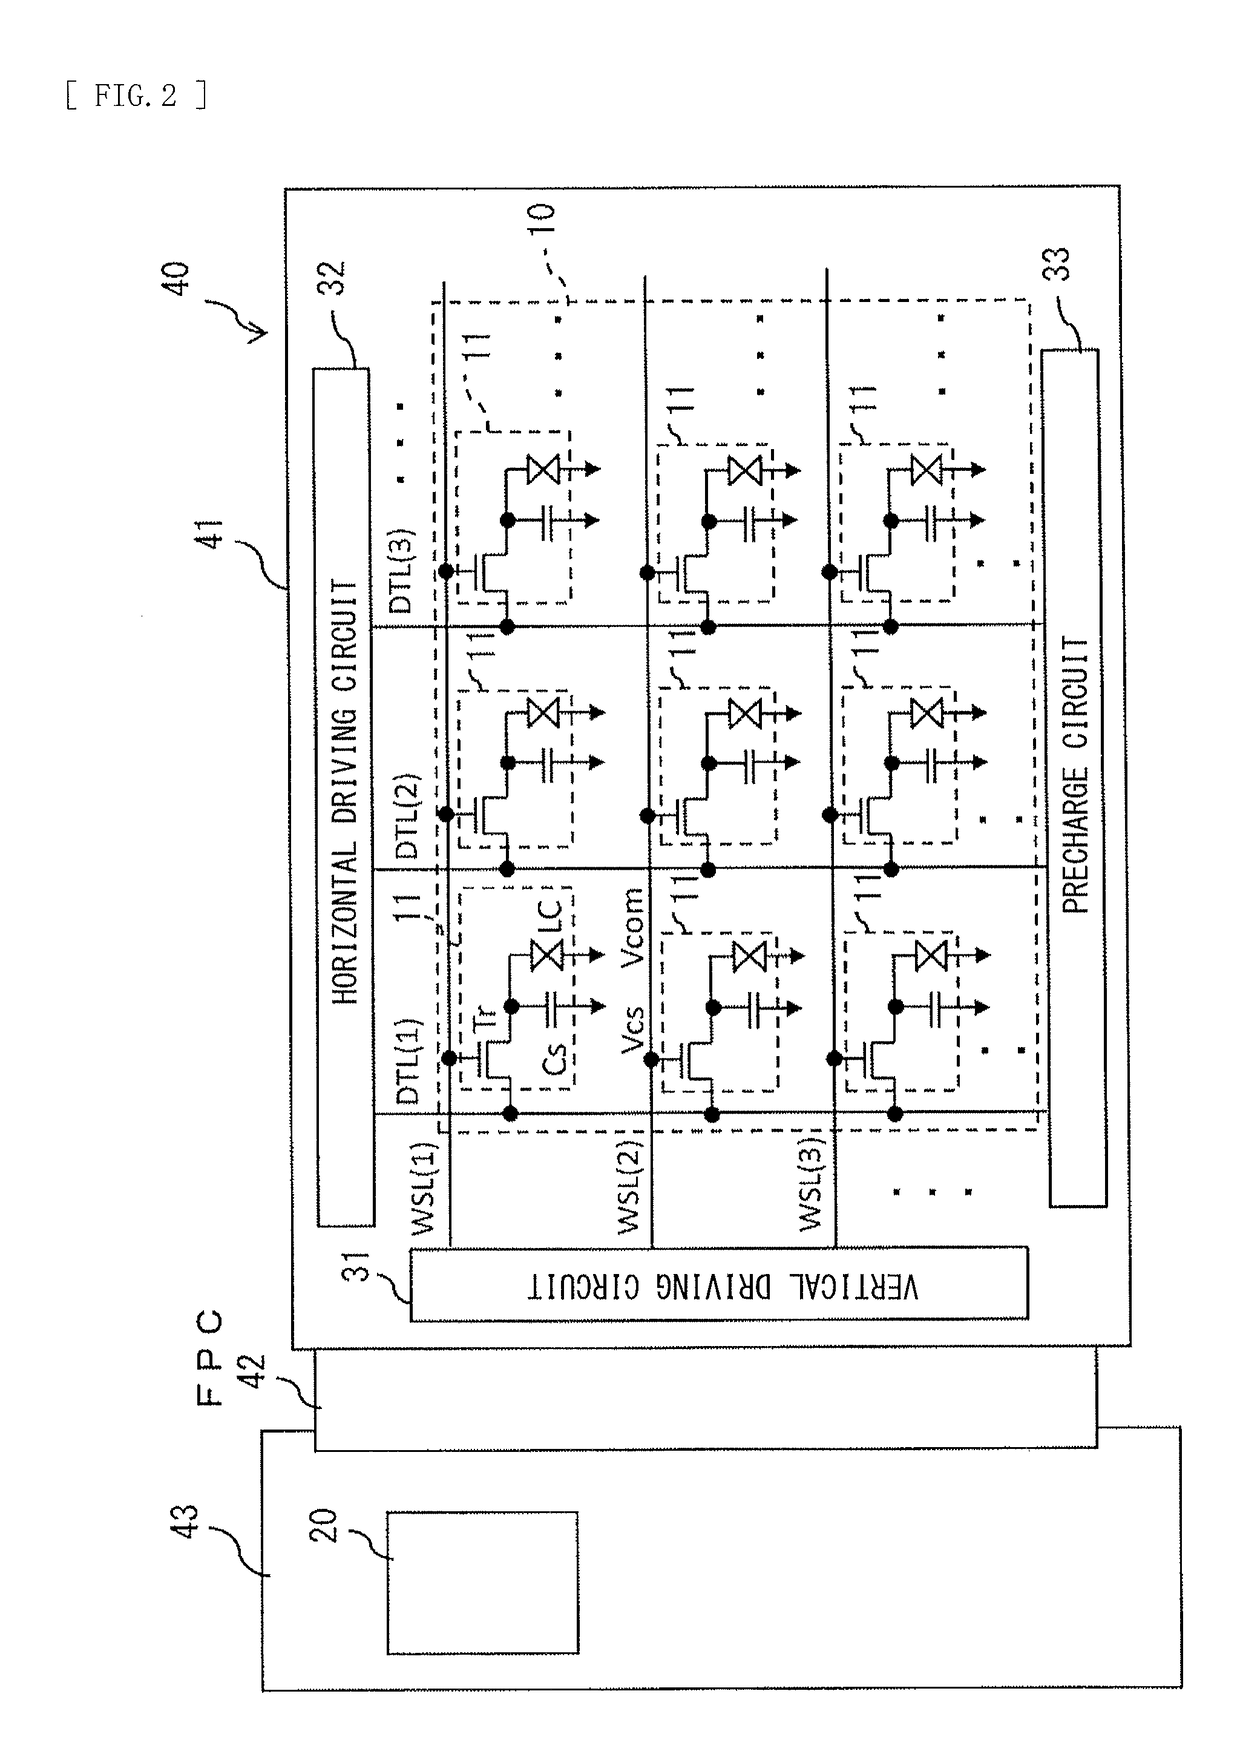 Display device, electronic apparatus, and projection display apparatus